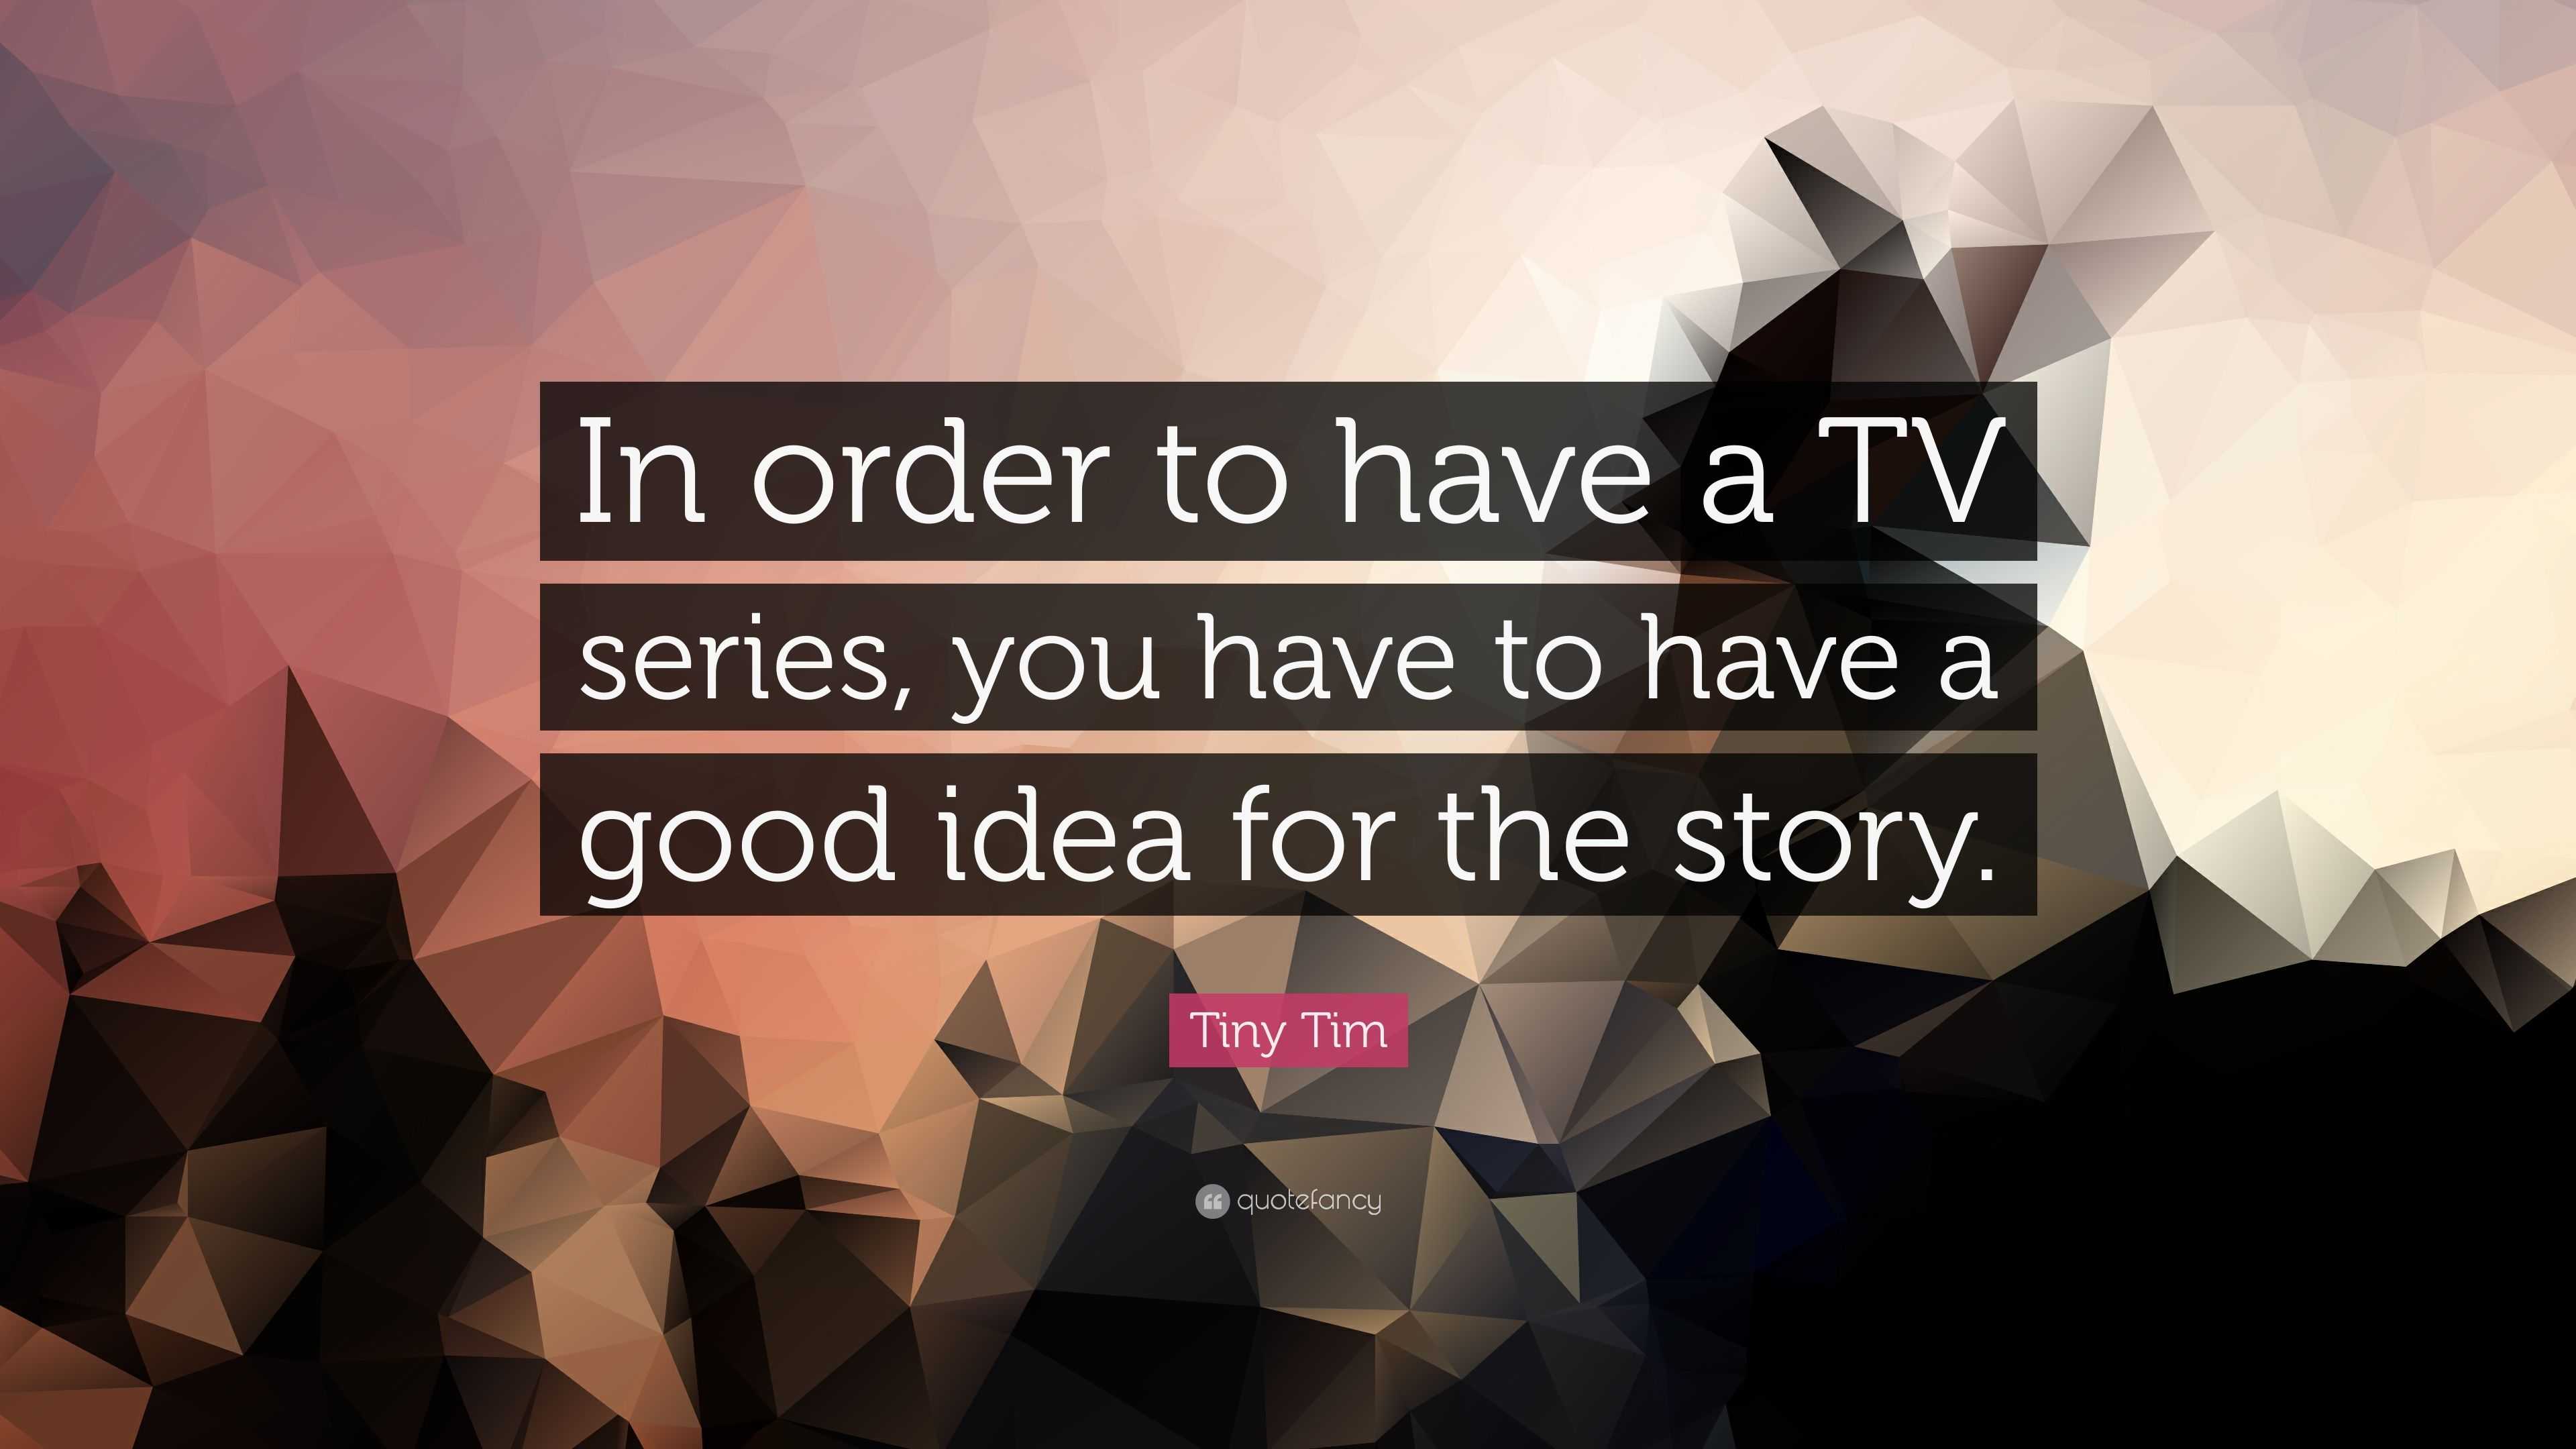 Tiny Tim Quote: “In order to have a TV series, you have to have a good